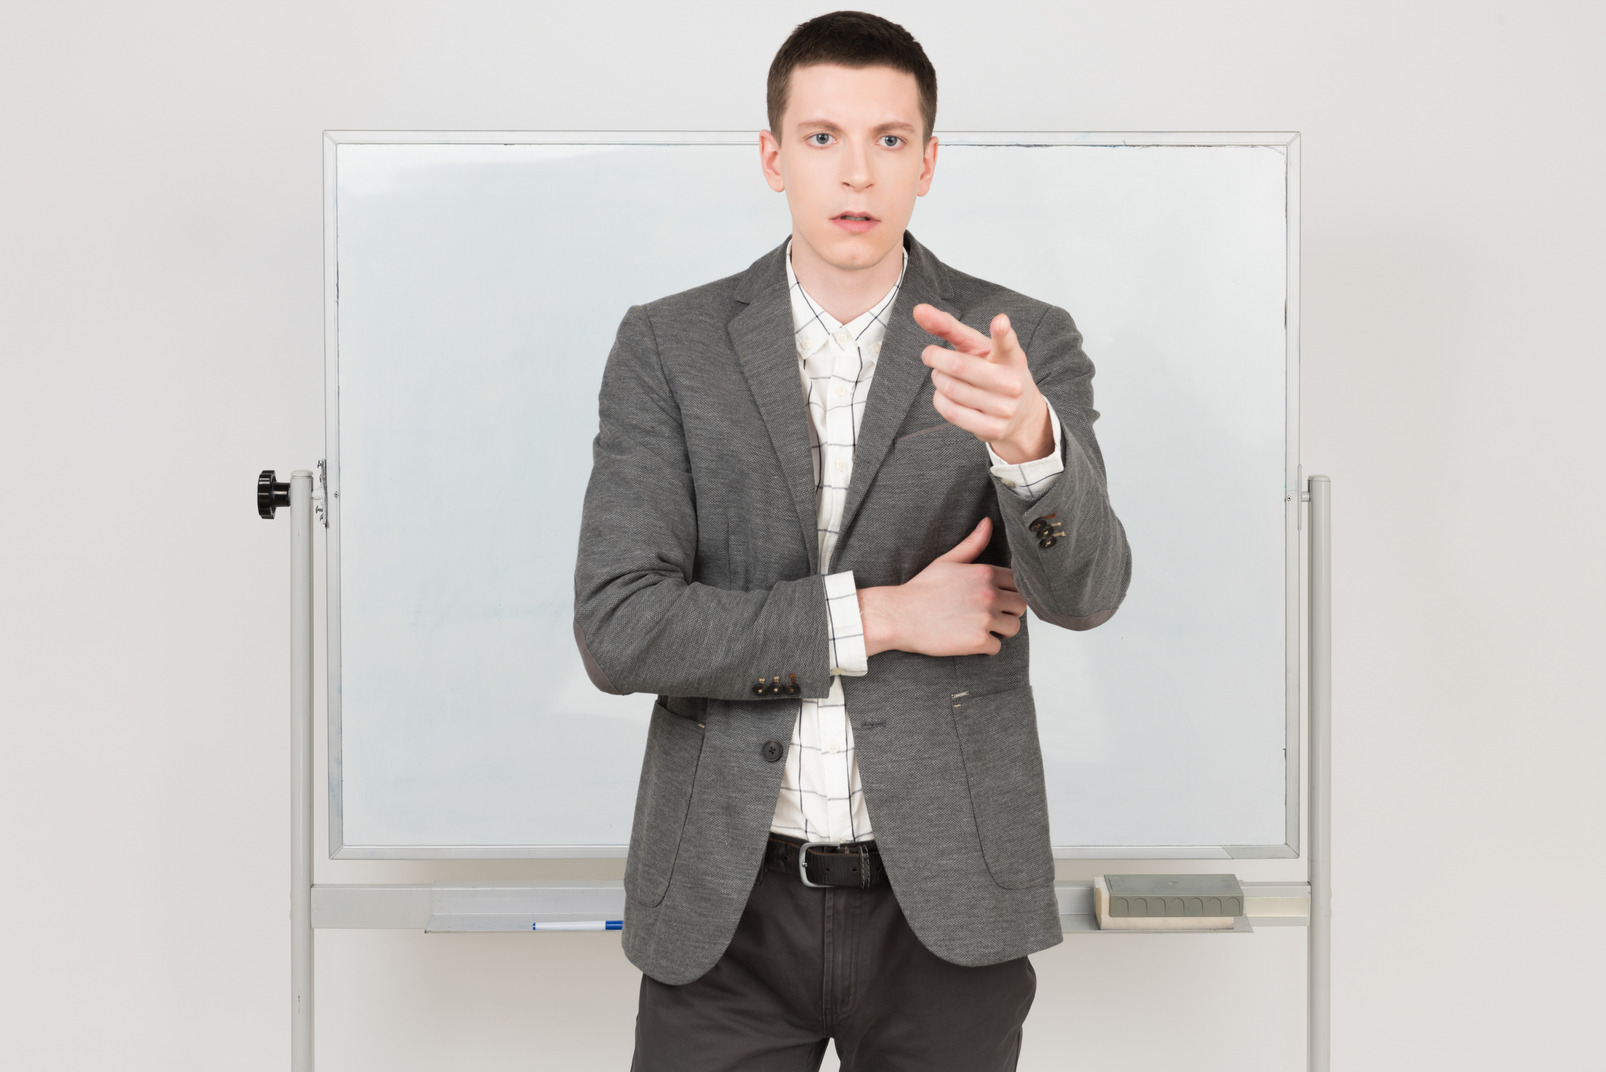 Young handsome man standing next to a whiteboard and pointing at something